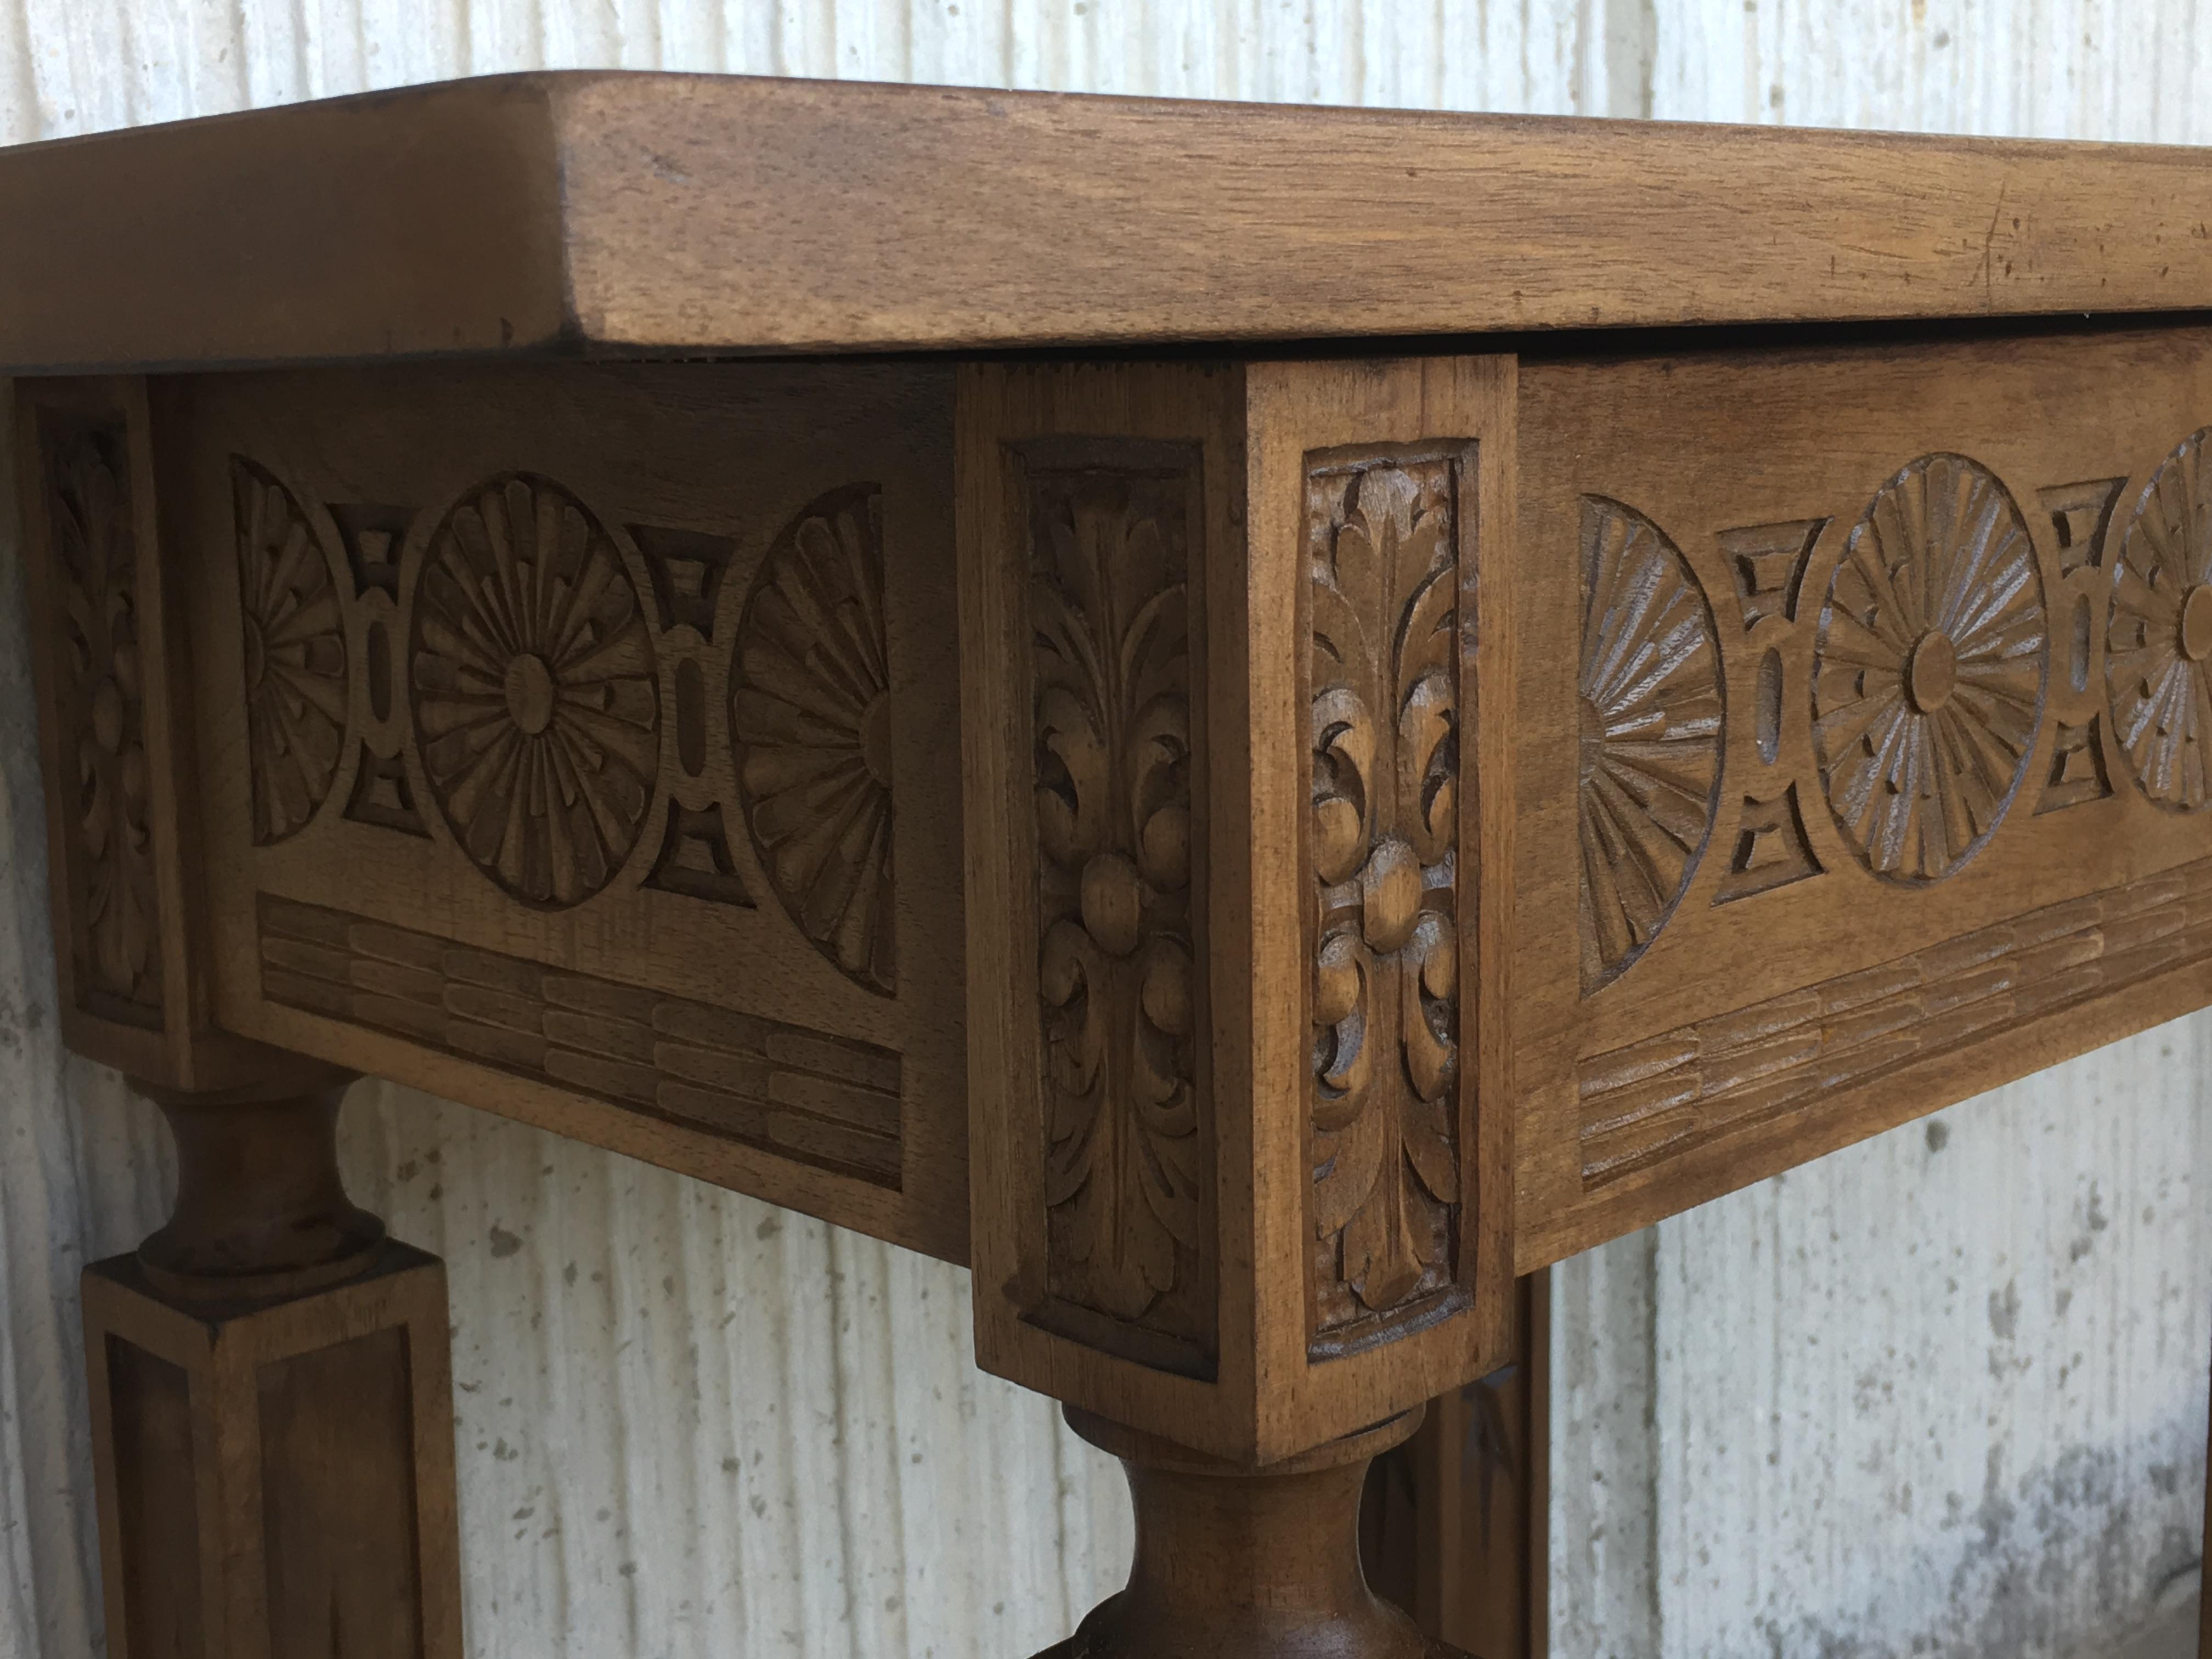 19th Century Spanish Carved Walnut Bench or Low Table with Two Drawers (19. Jahrhundert)